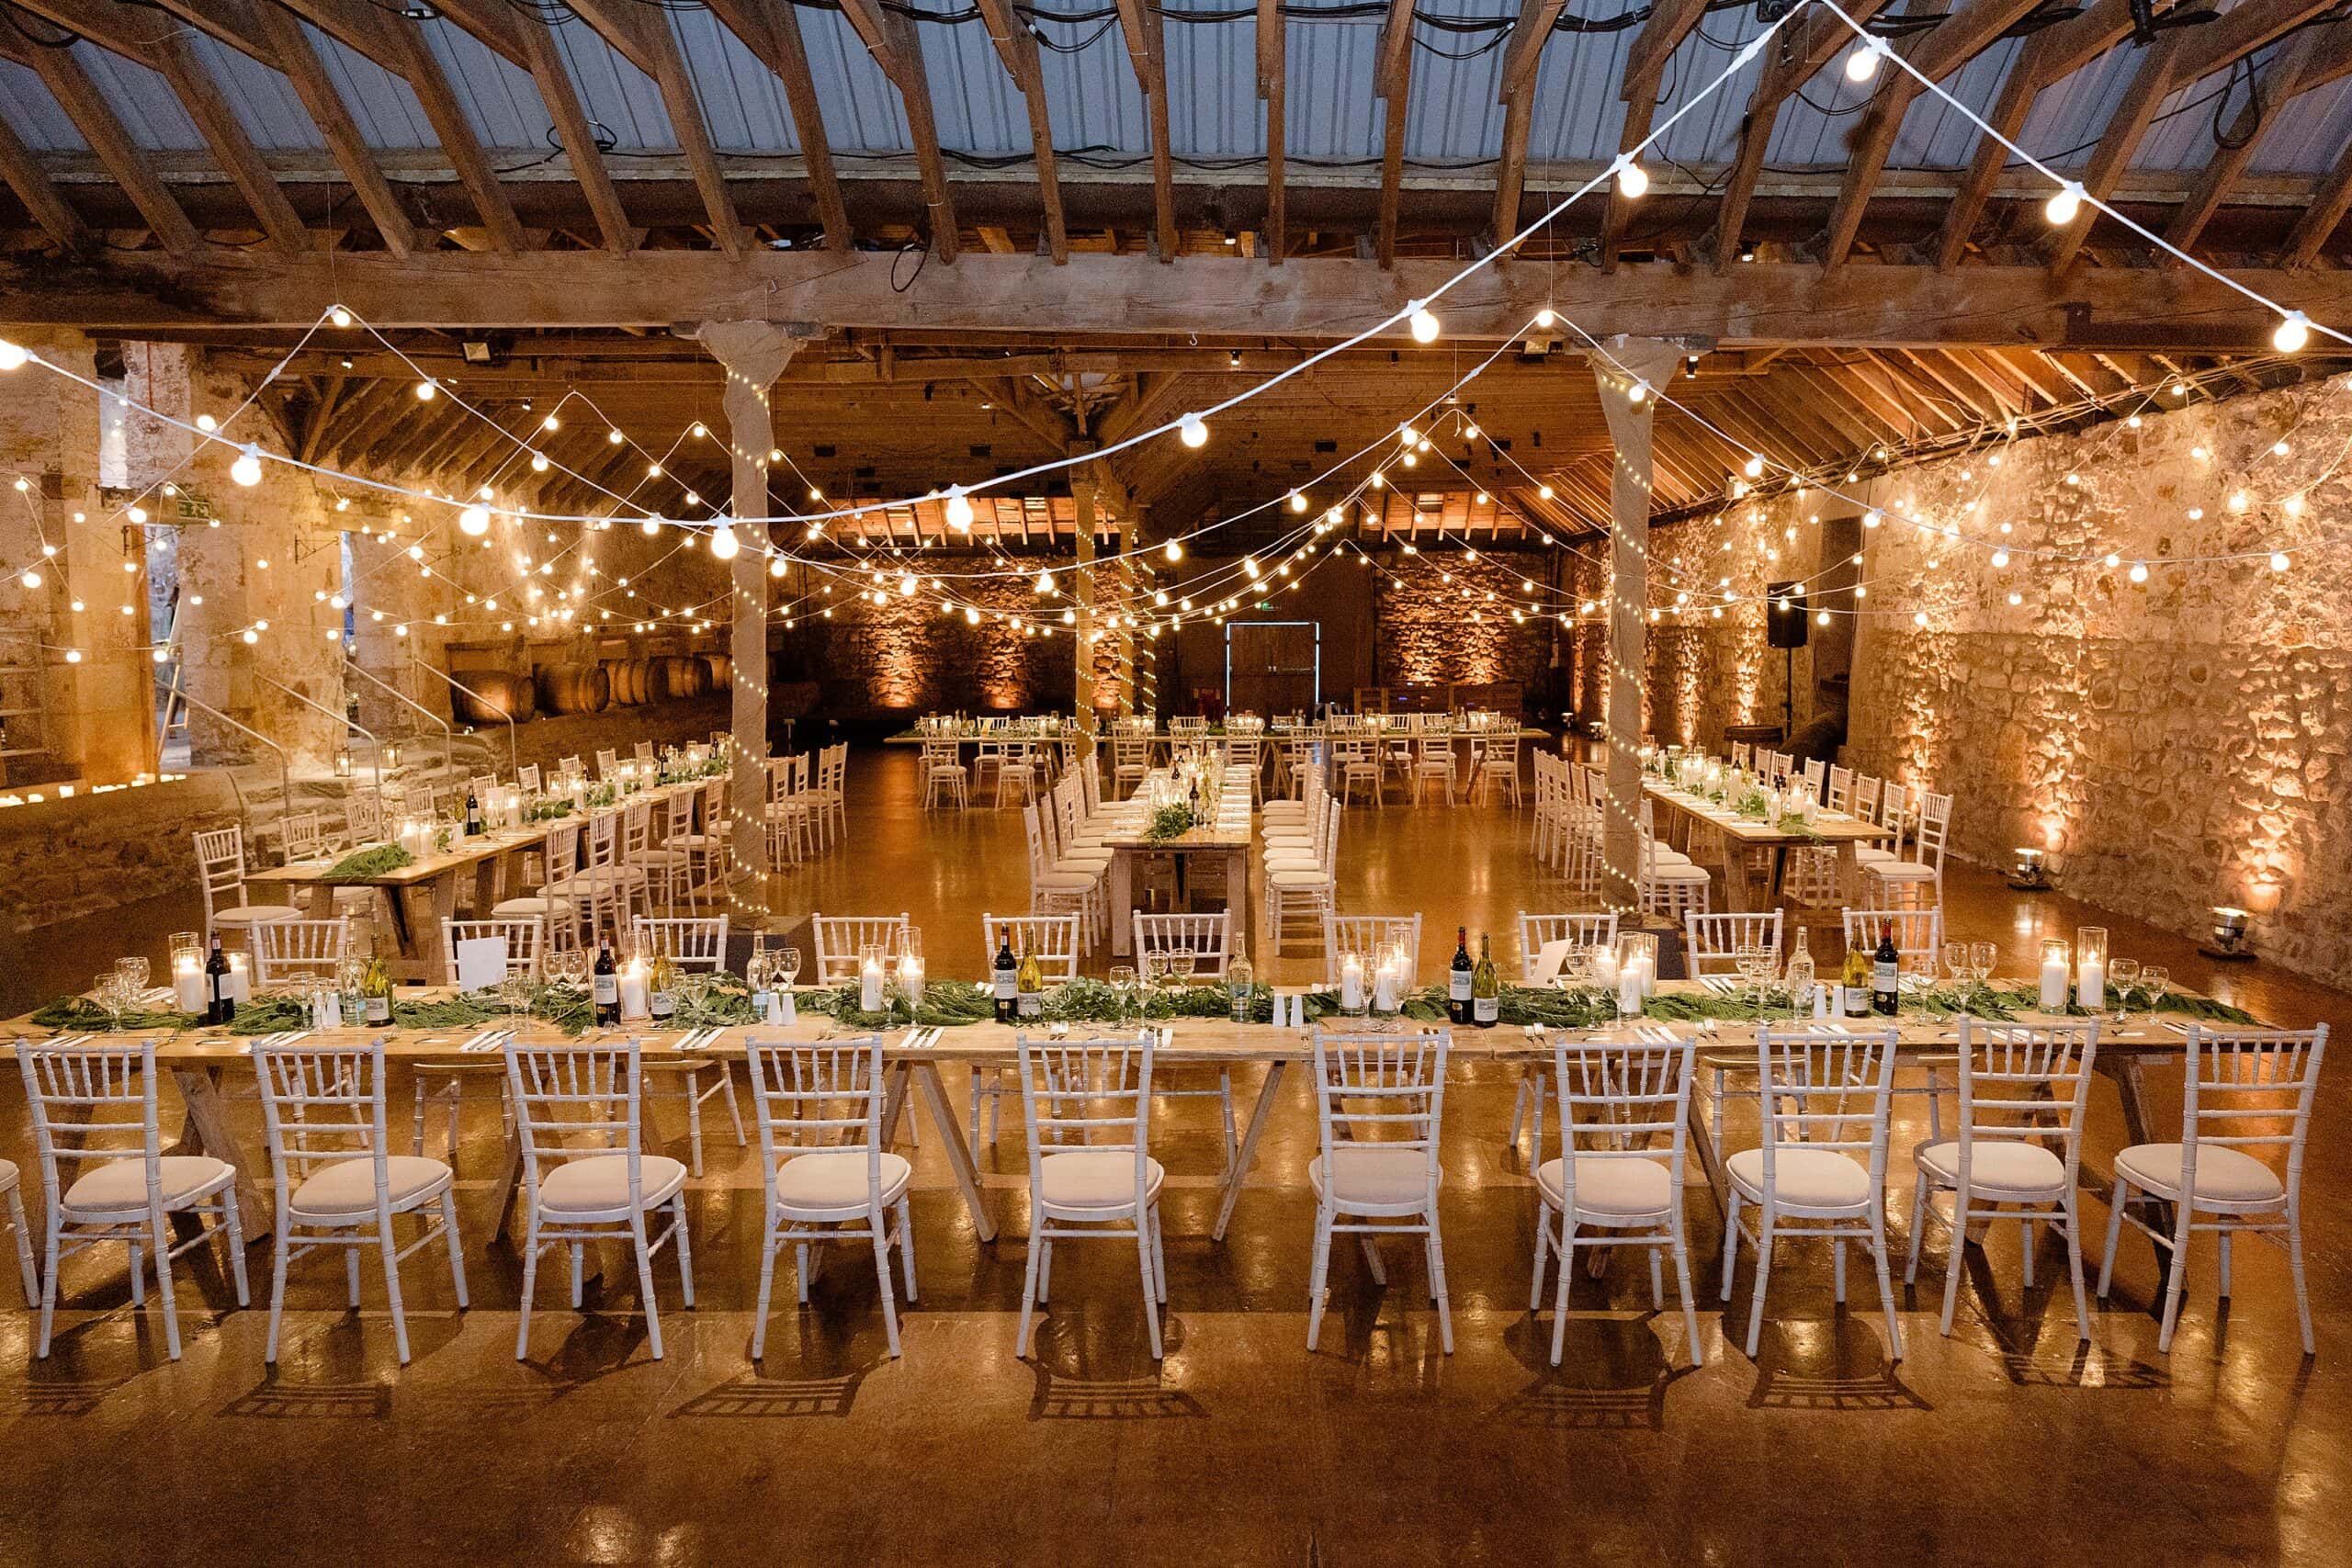 interior inside view of a scottish farm wedding venue with tables and chairs set for dinner with festoon lights and wooden beams above photographed by st andrews wedding photographer